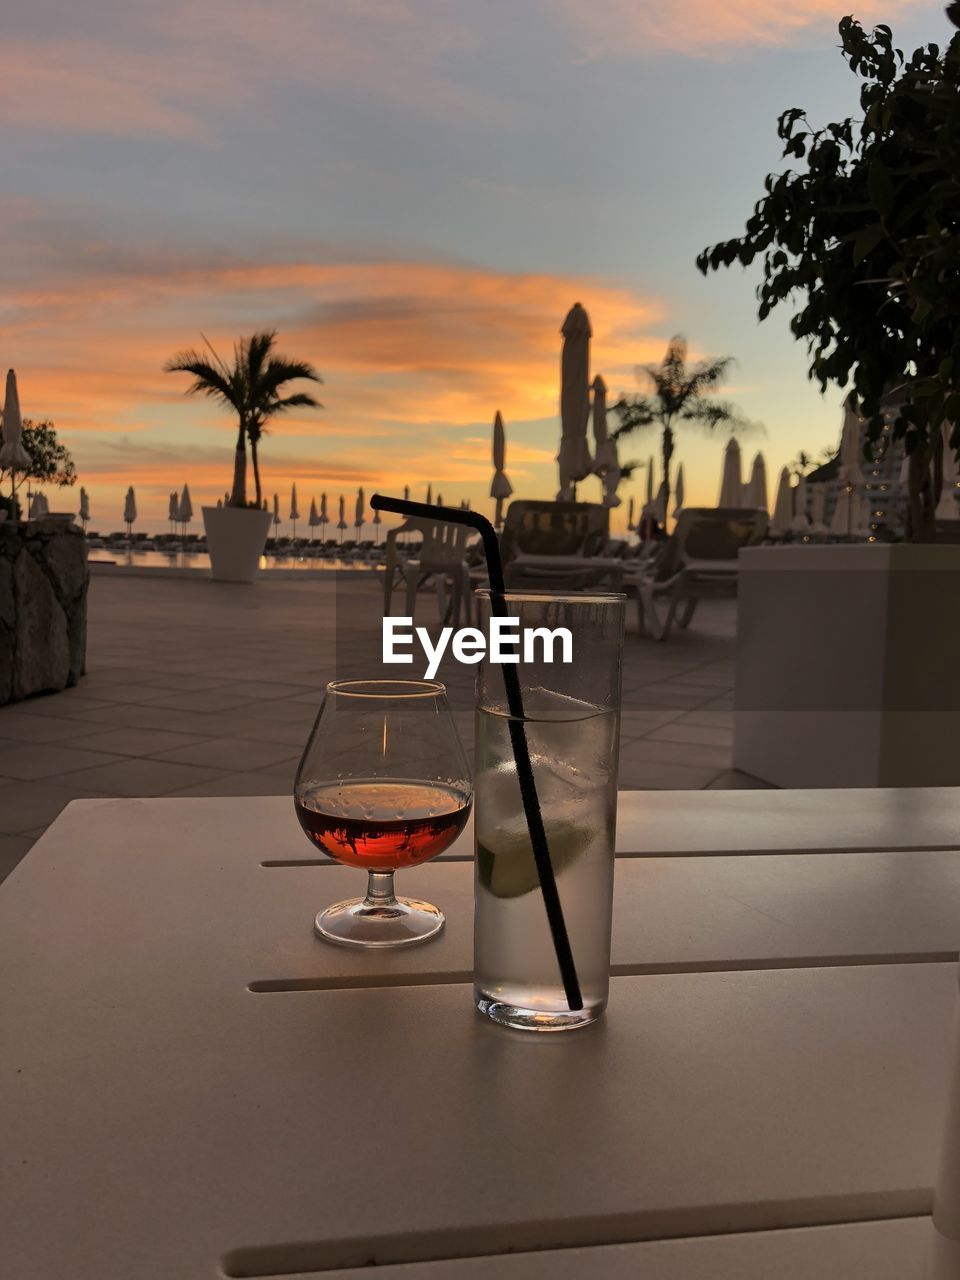 VIEW OF WINE GLASSES ON TABLE AGAINST SUNSET